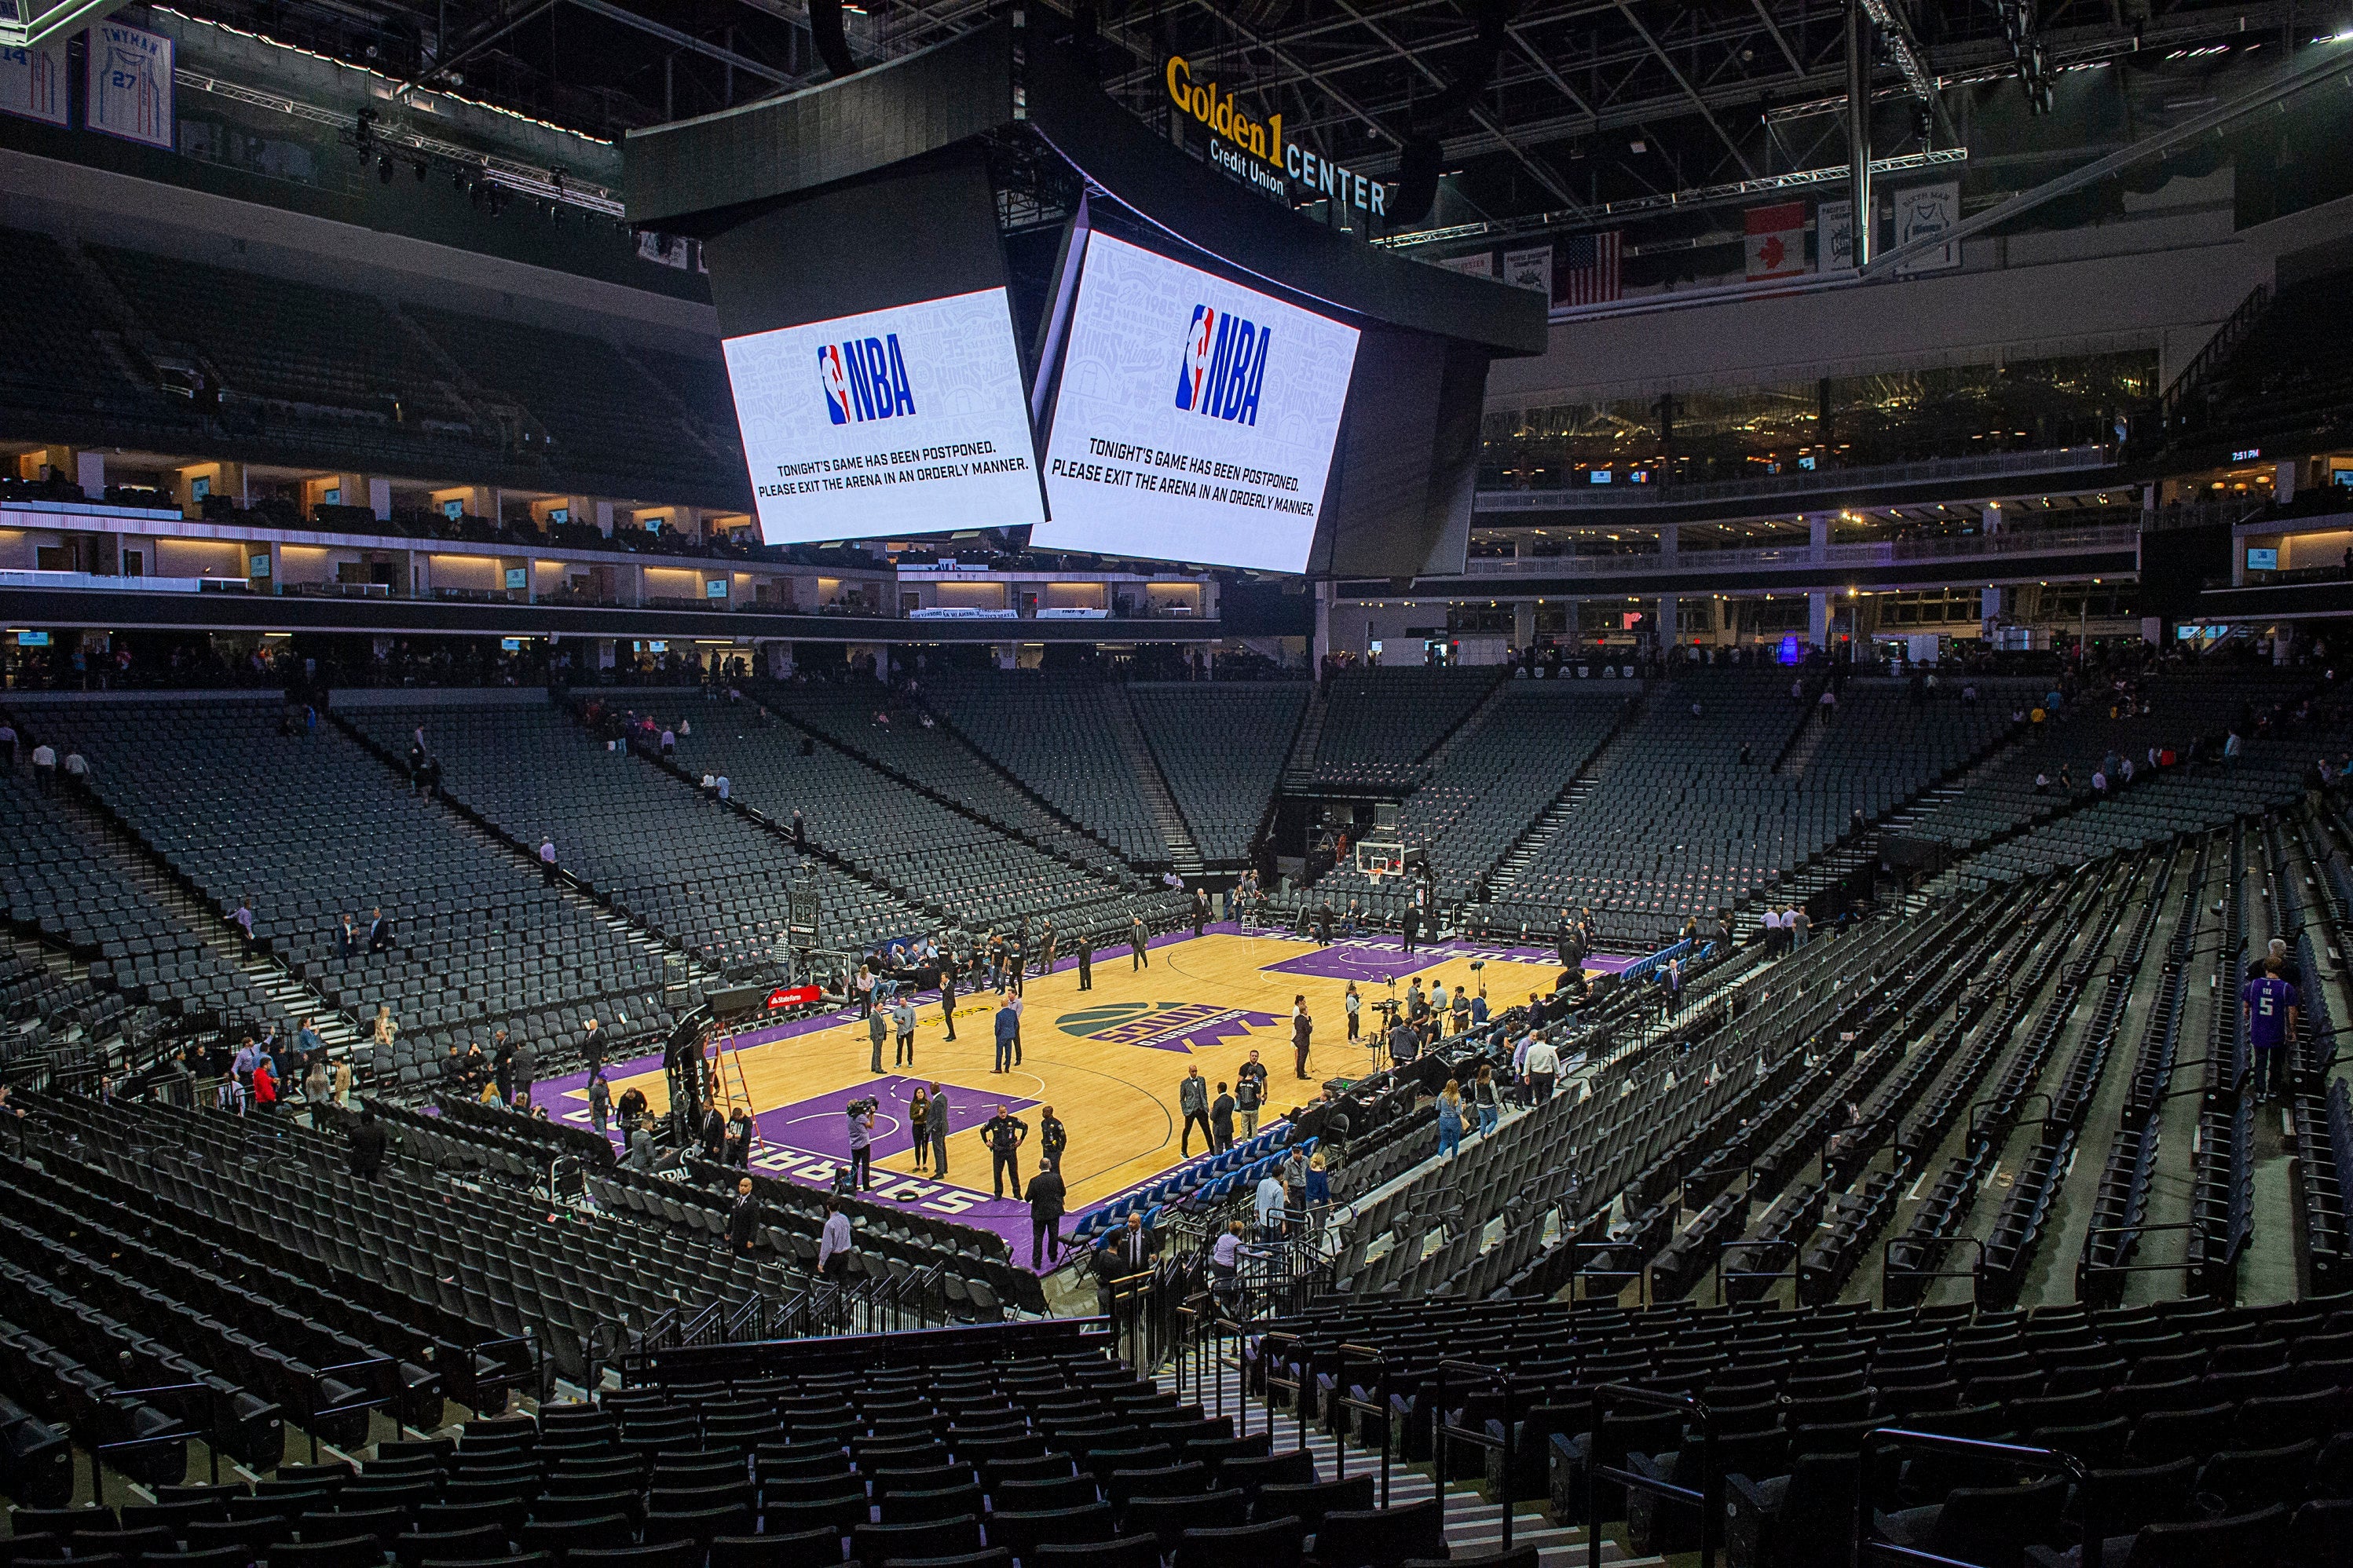 A near-empty basketball court with a Jumbotron overhead broadcasting the NBA logo.